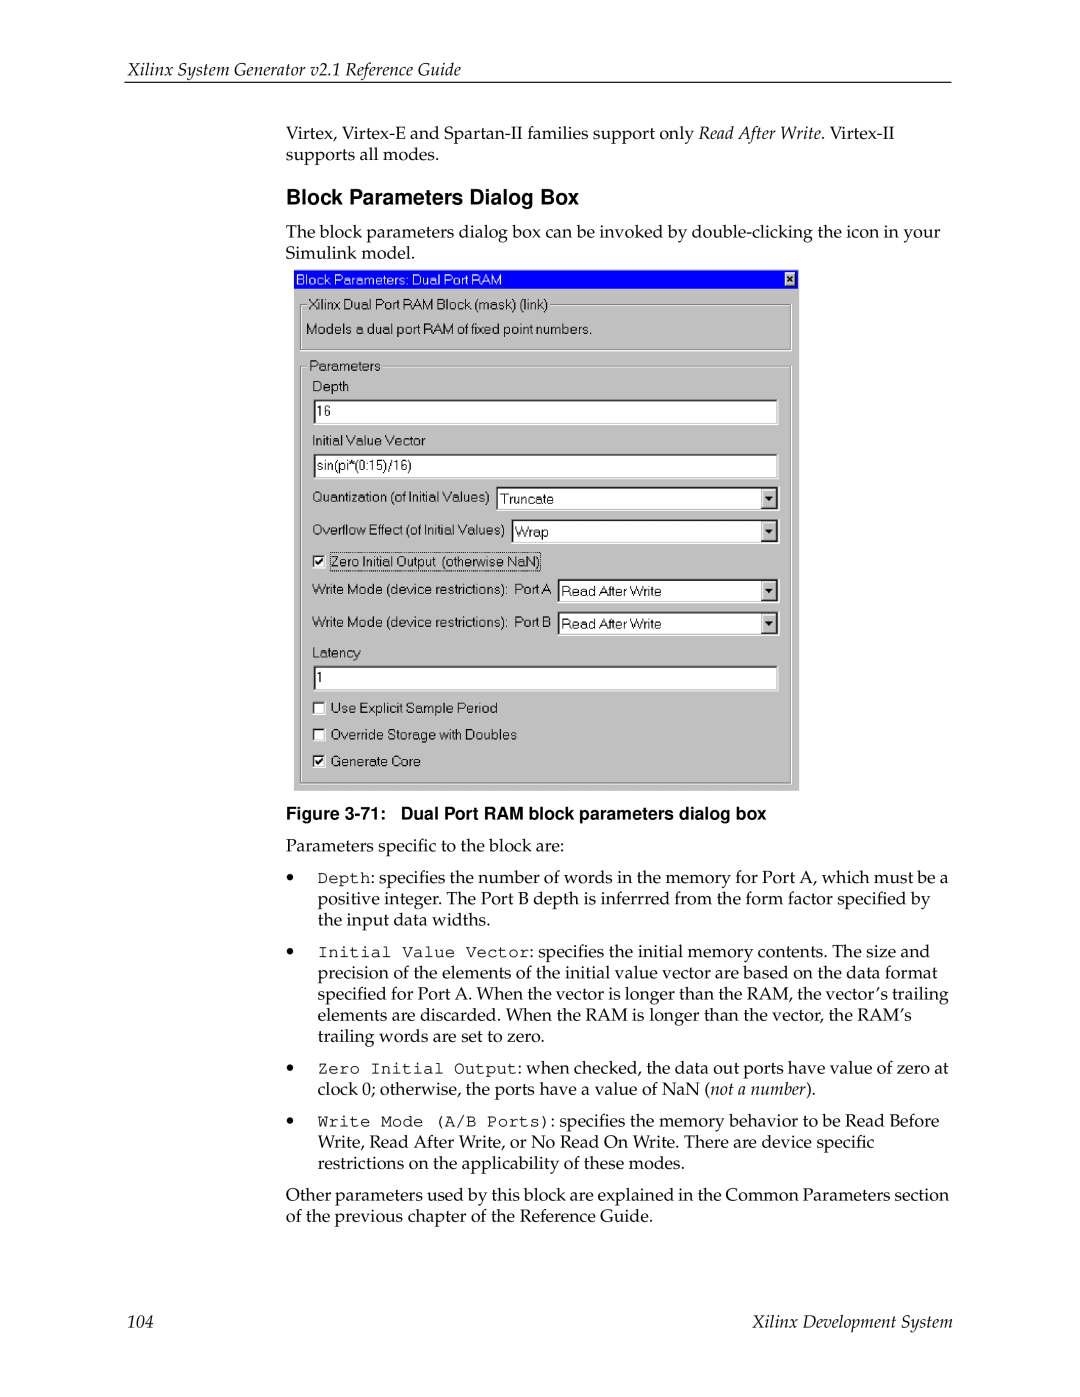 Xilinx V2.1 Block Parameters Dialog Box, Xilinx System Generator v2.1 Reference Guide, Parameters speciﬁc to the block are 